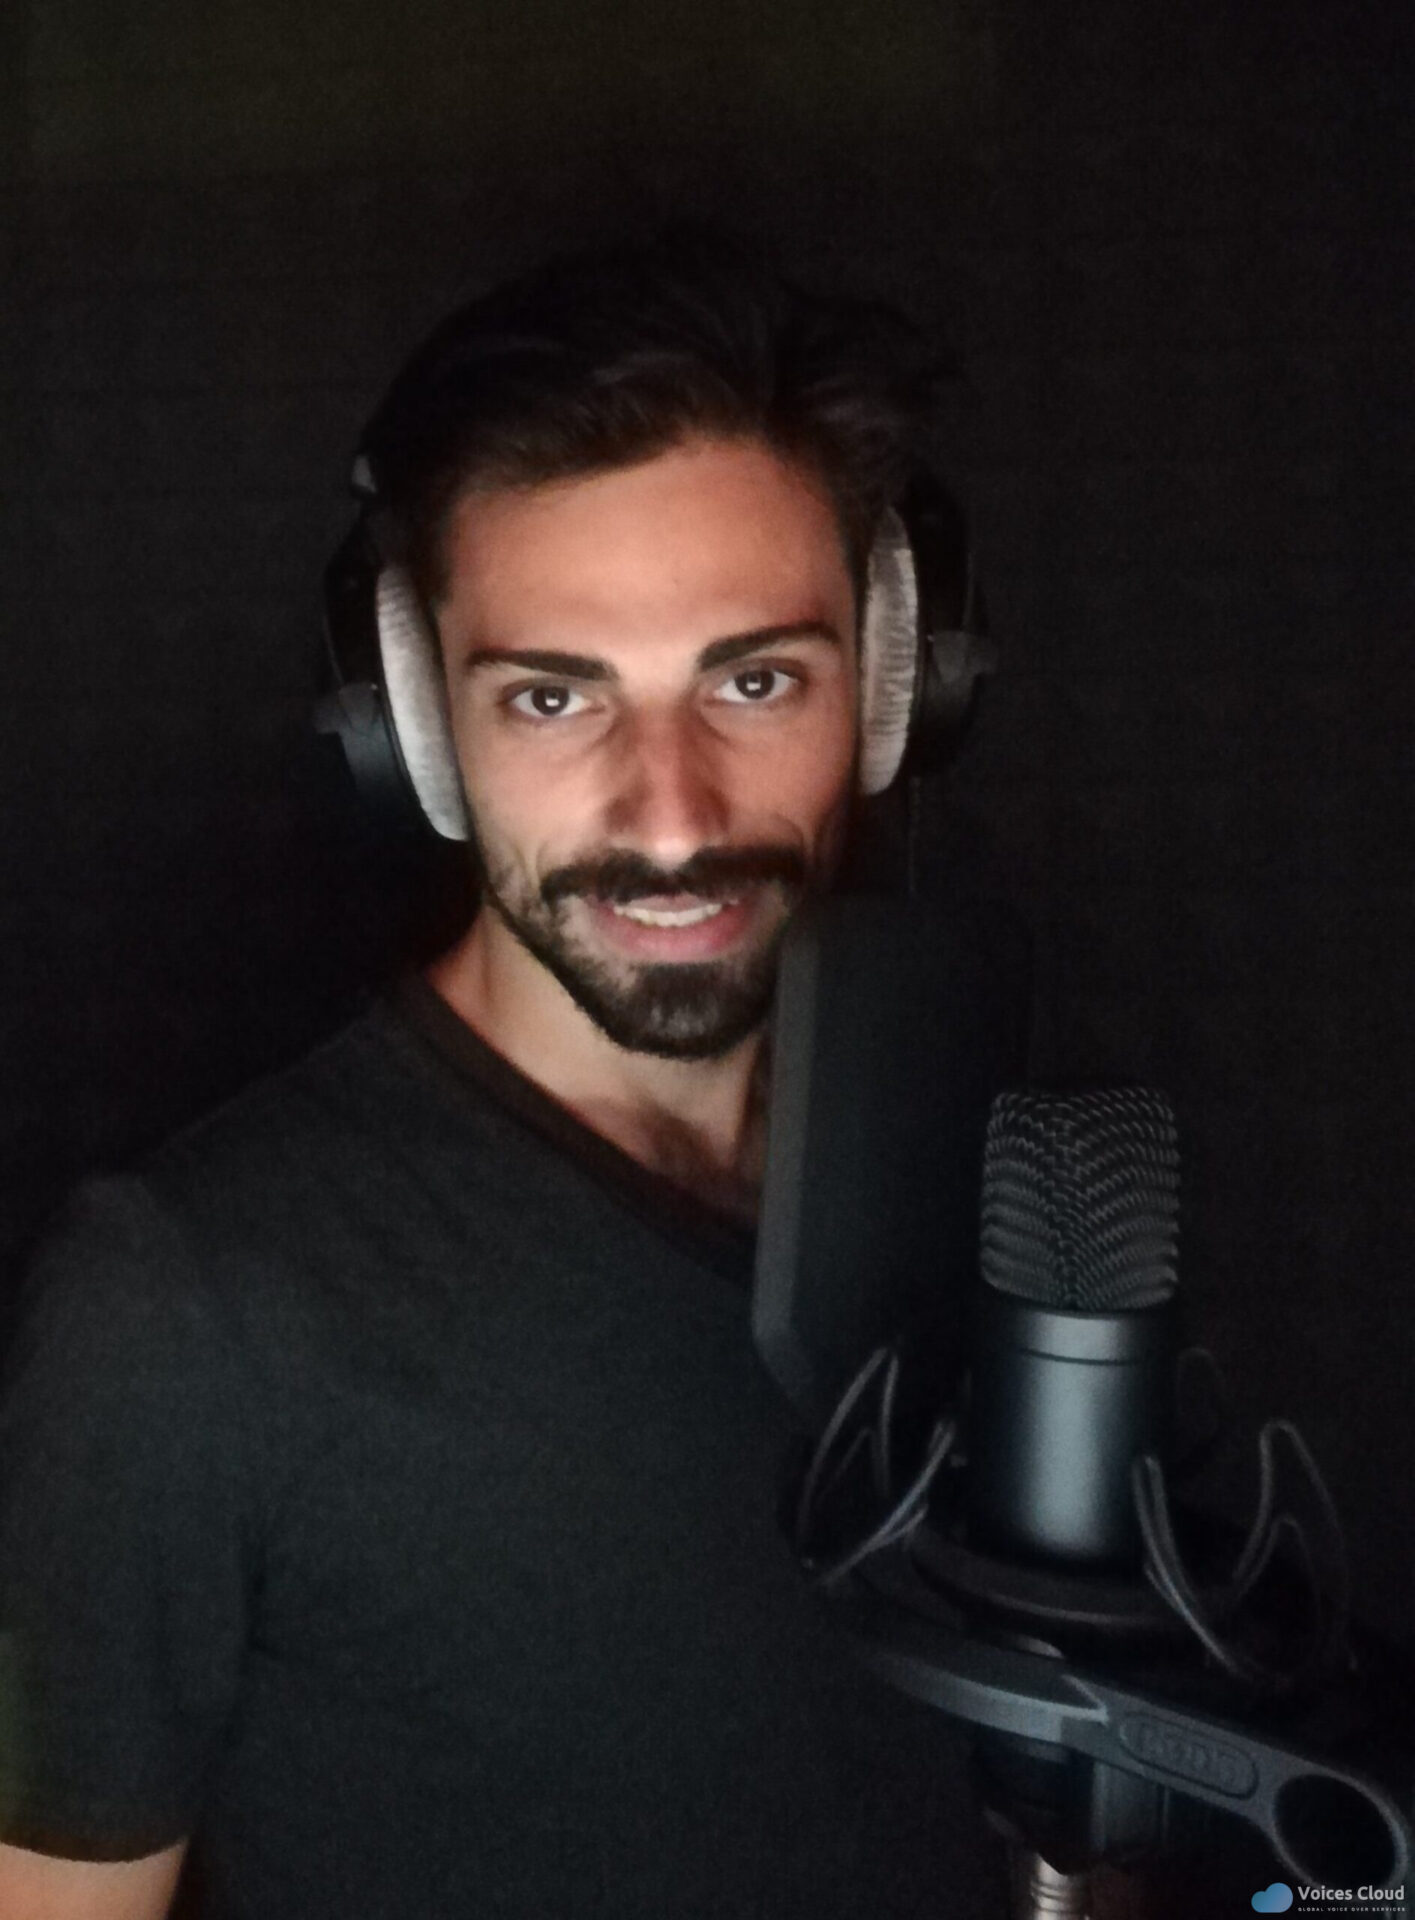 14362Italian Voice Actor (Voice Over And Dubbing)